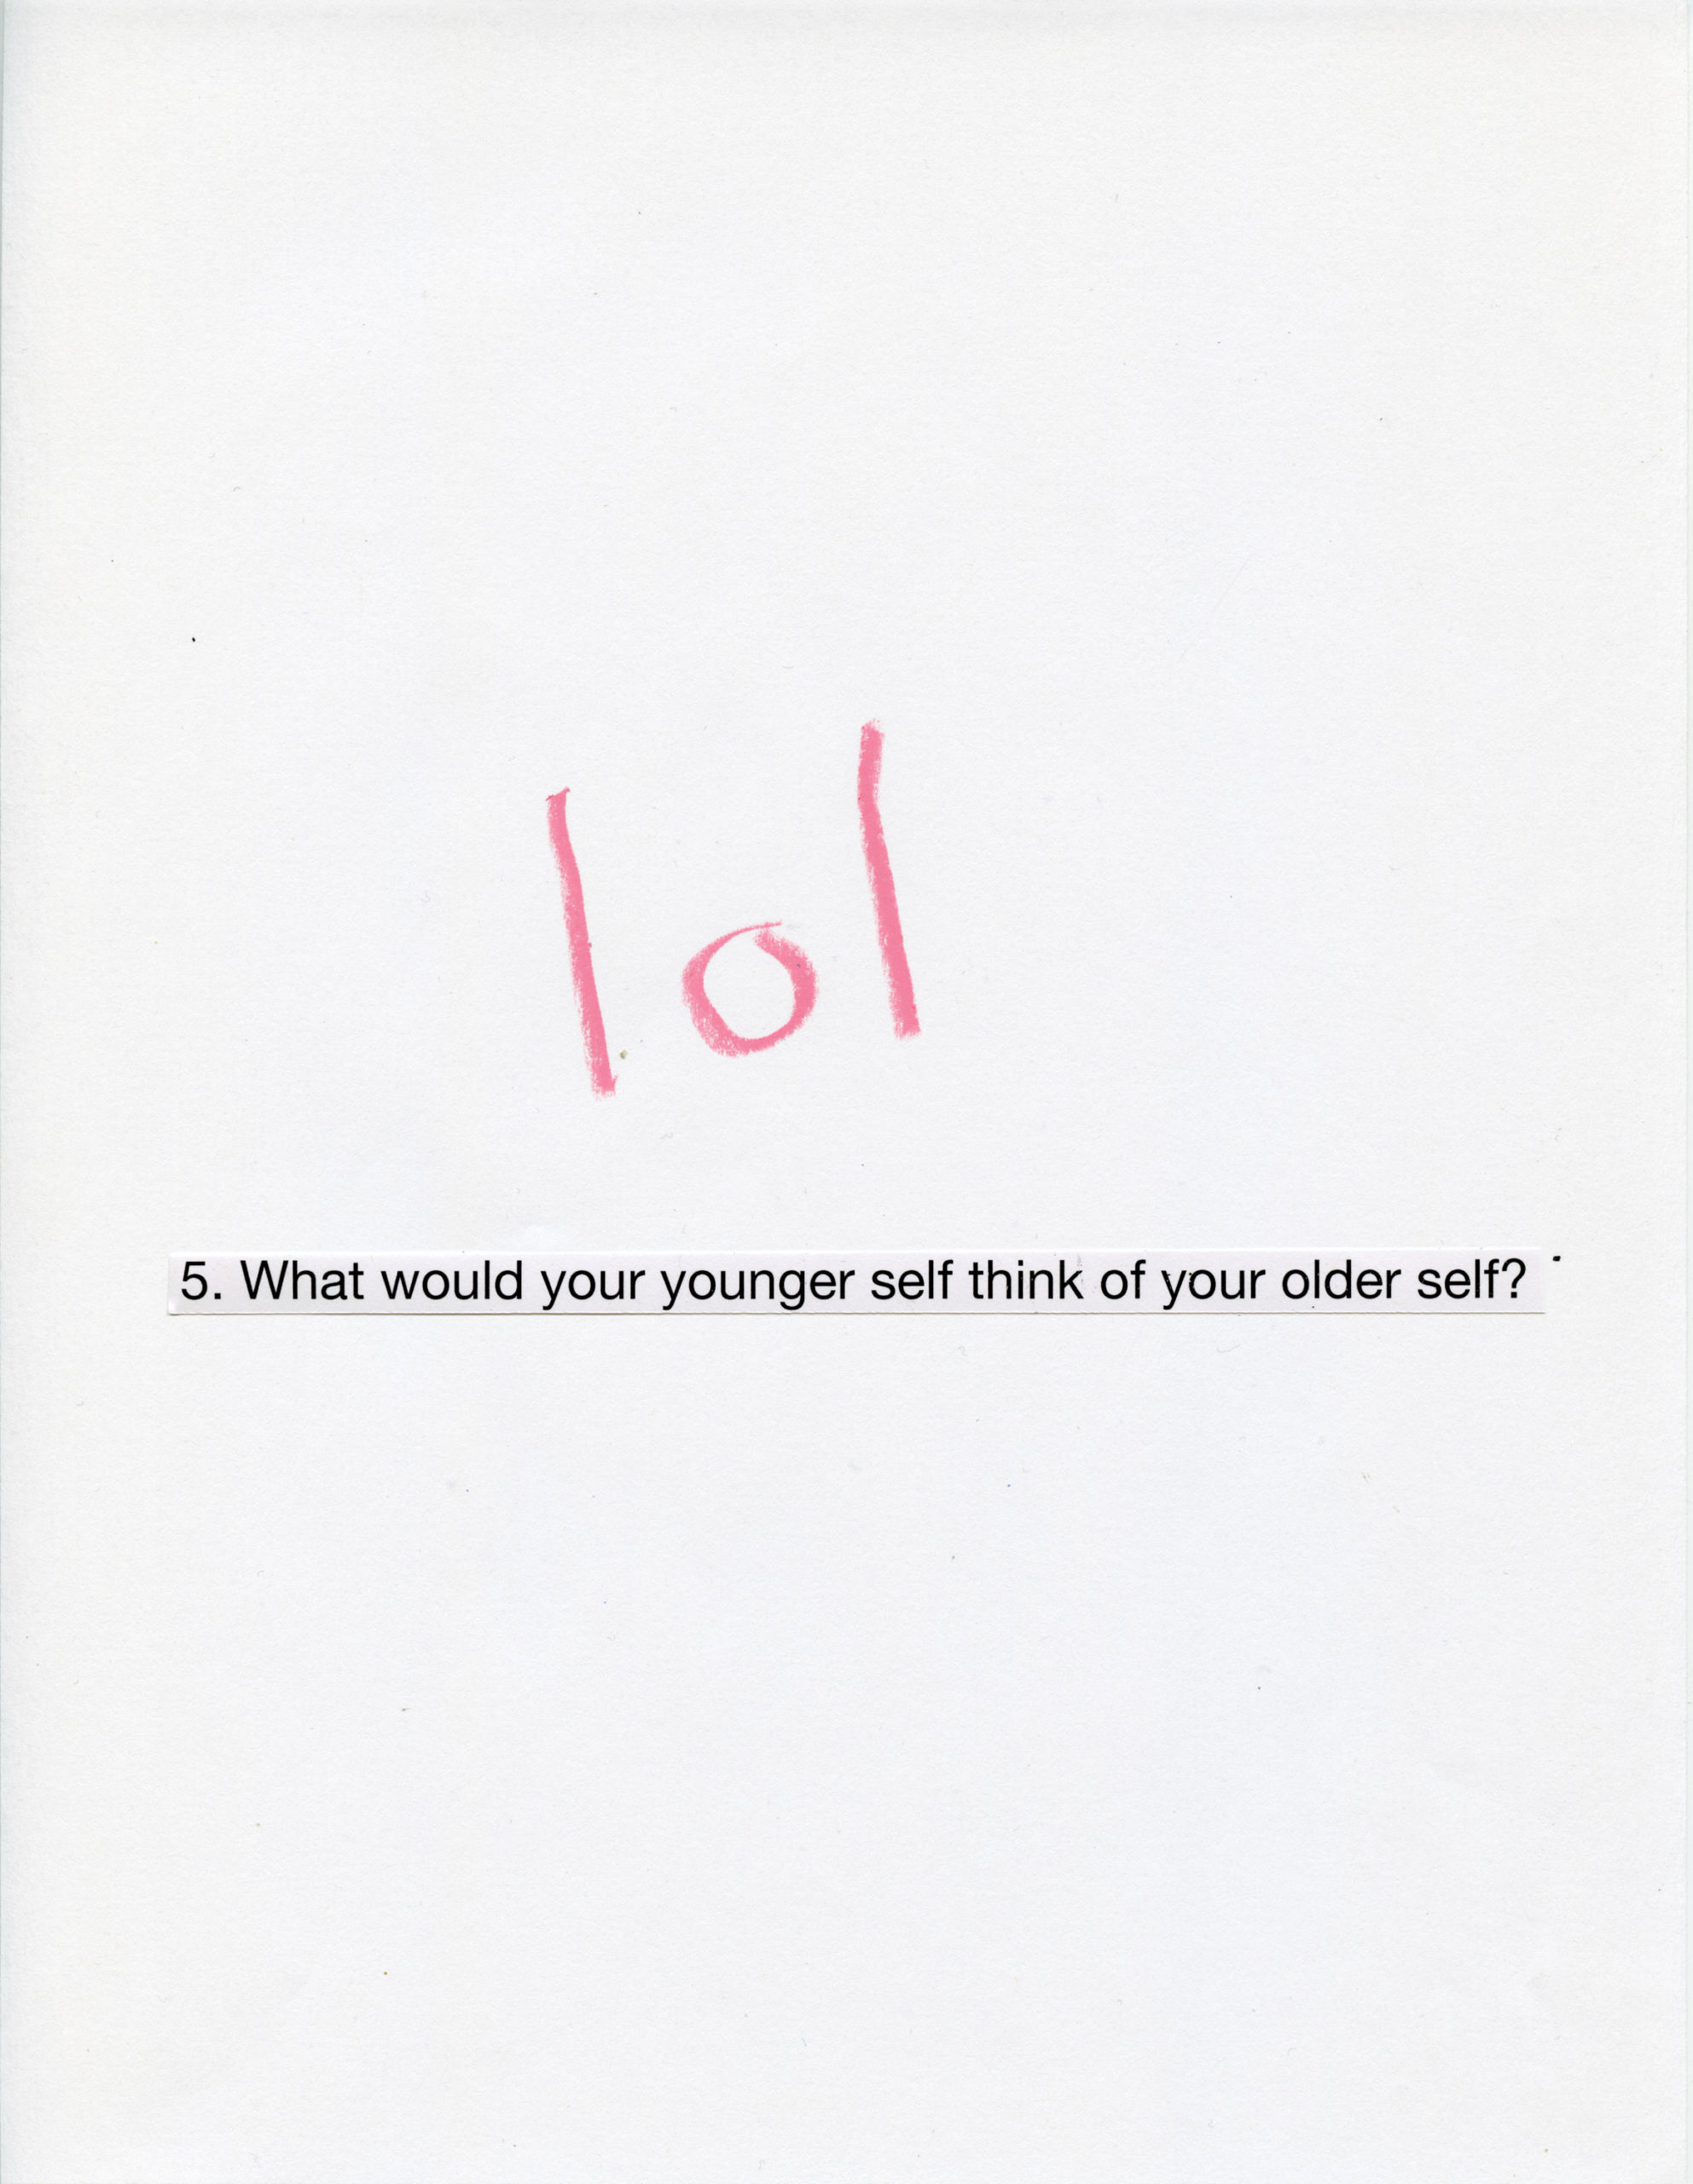 Daniel Bromberg Picture Interview Kollektiv Gallery What would your younger self think of your older self? Answered is the letters 'lol' in red crayon